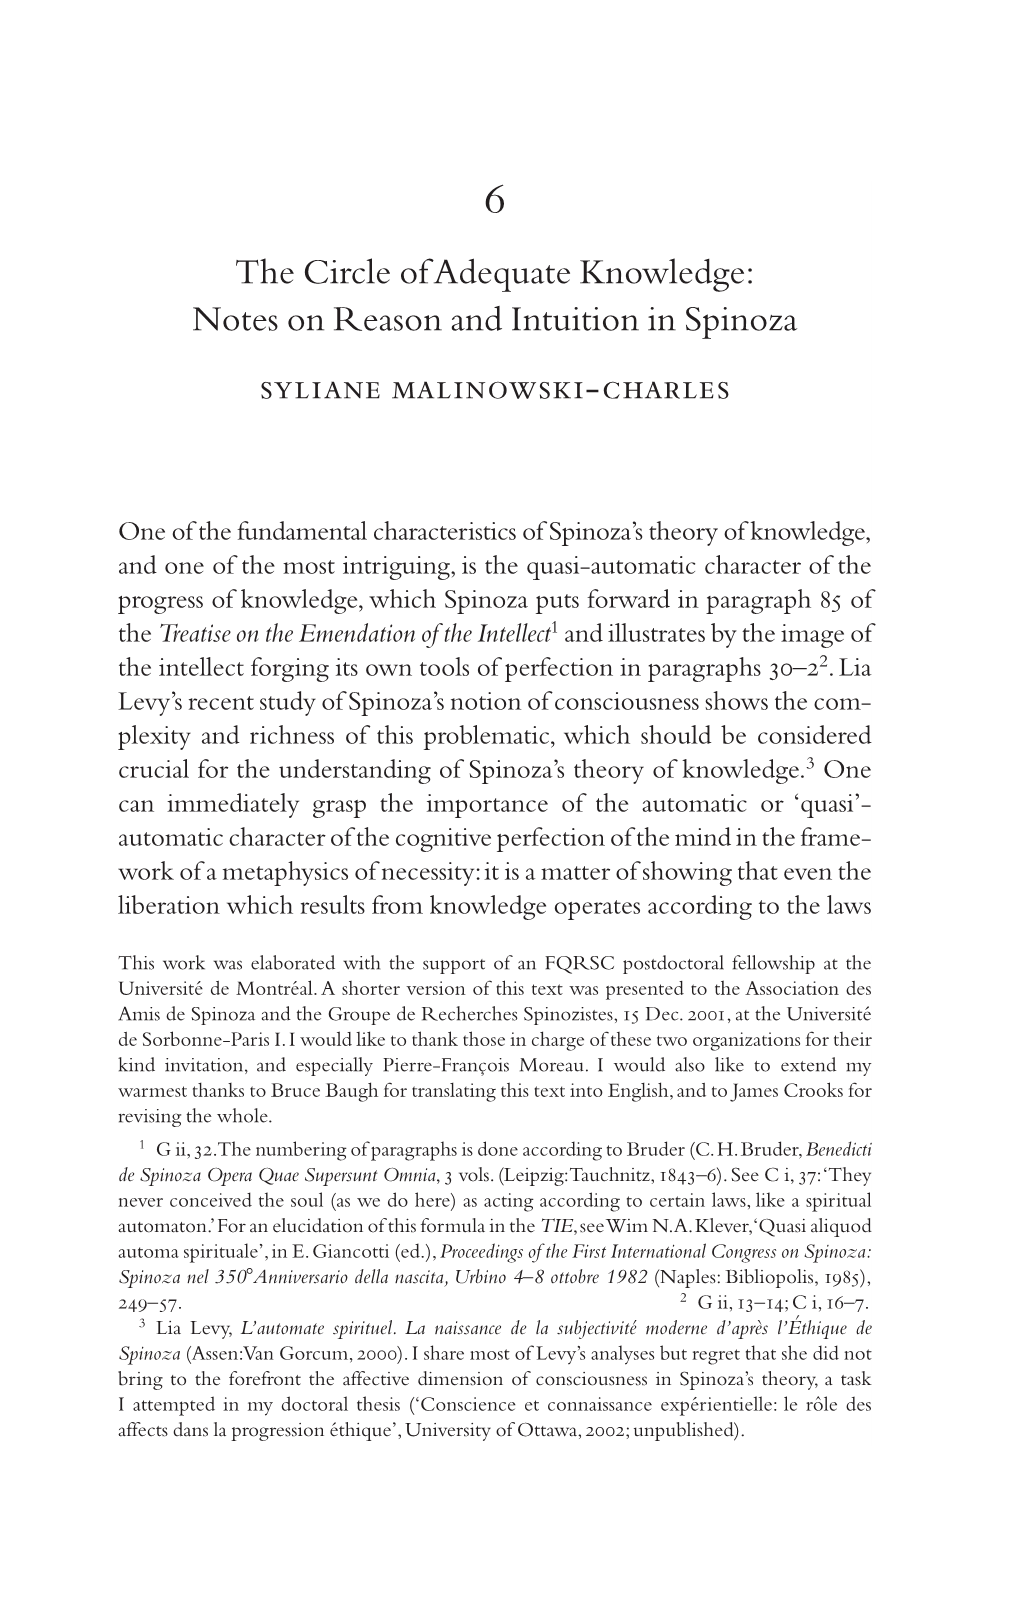 The Circle of Adequate Knowledge: Notes on Reason and Intuition in Spinoza  -